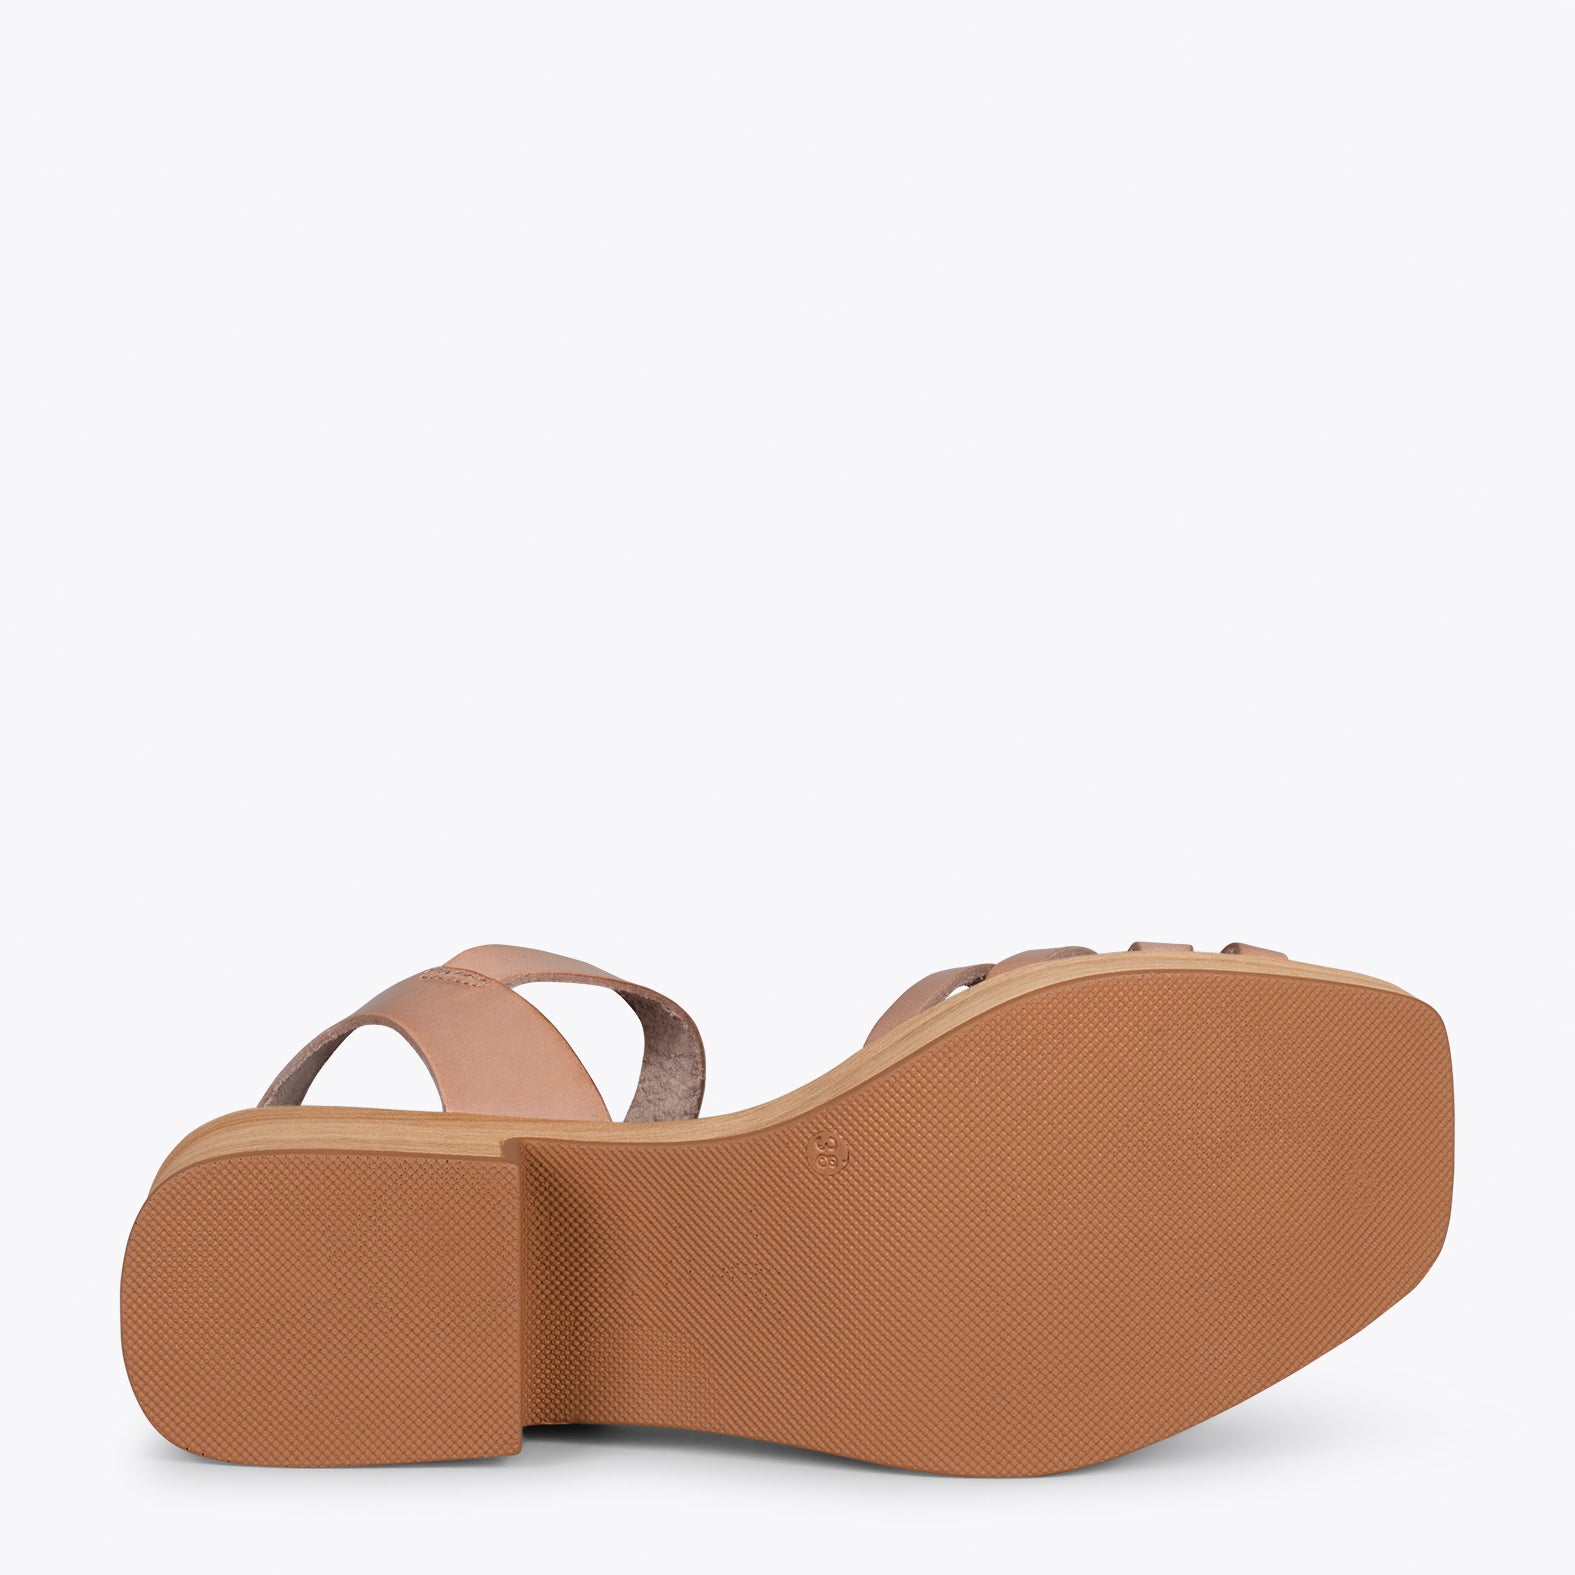 WOOD – NUDE strappy sandal with wooden heel